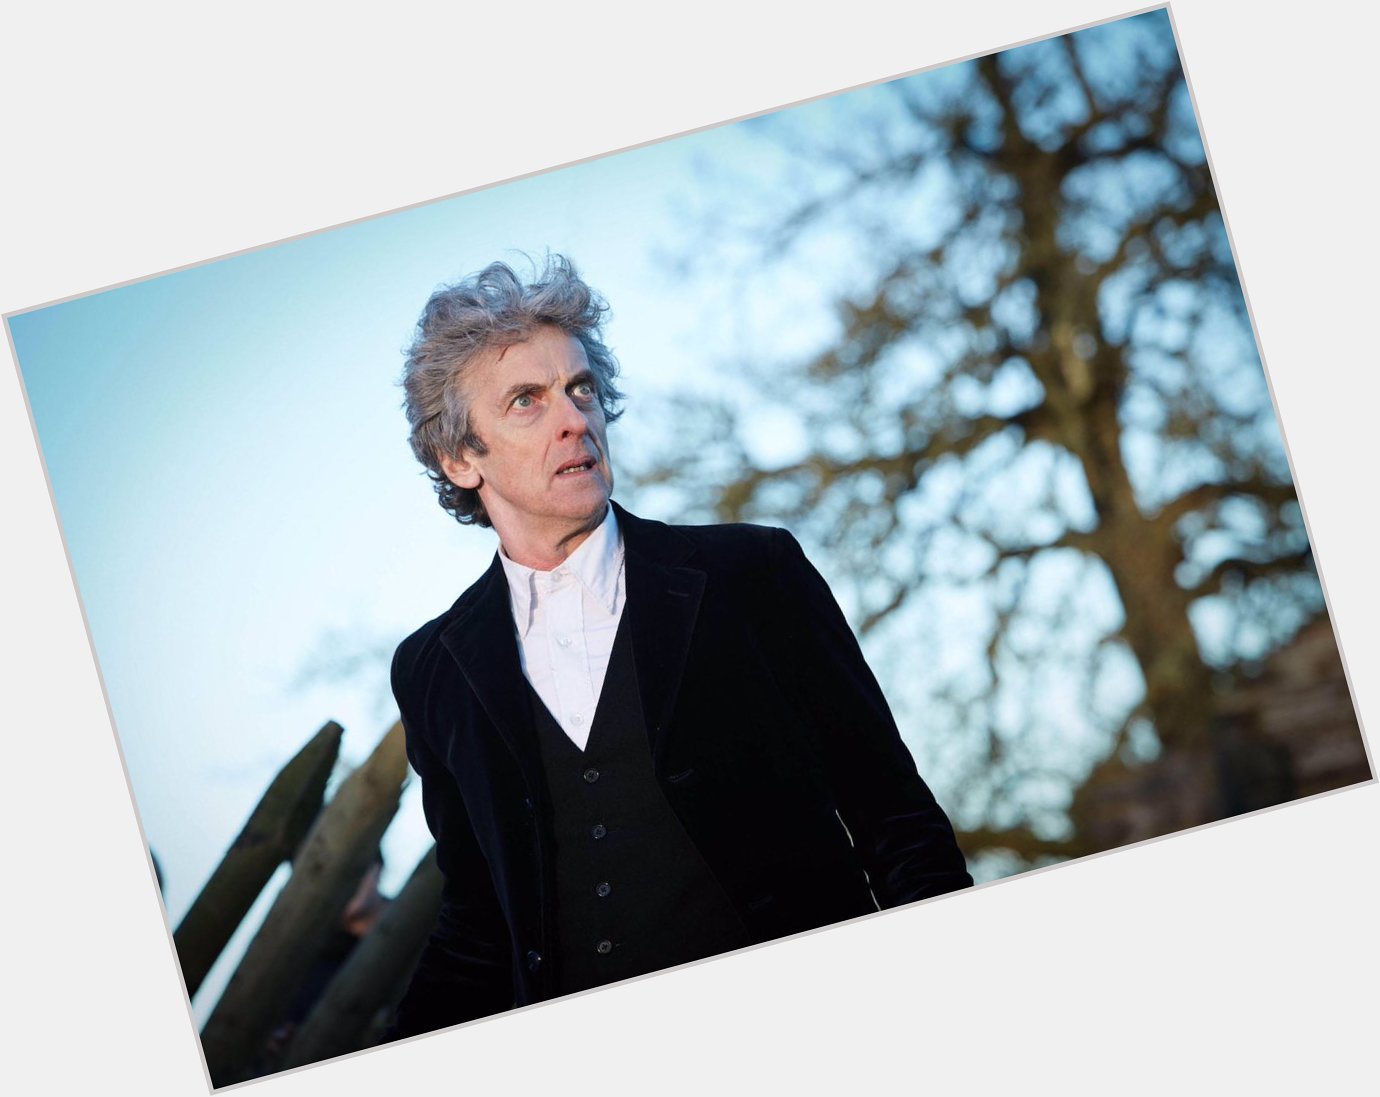 Happy birthday to my favorite incarnation of the Doctor, Peter Capaldi. 